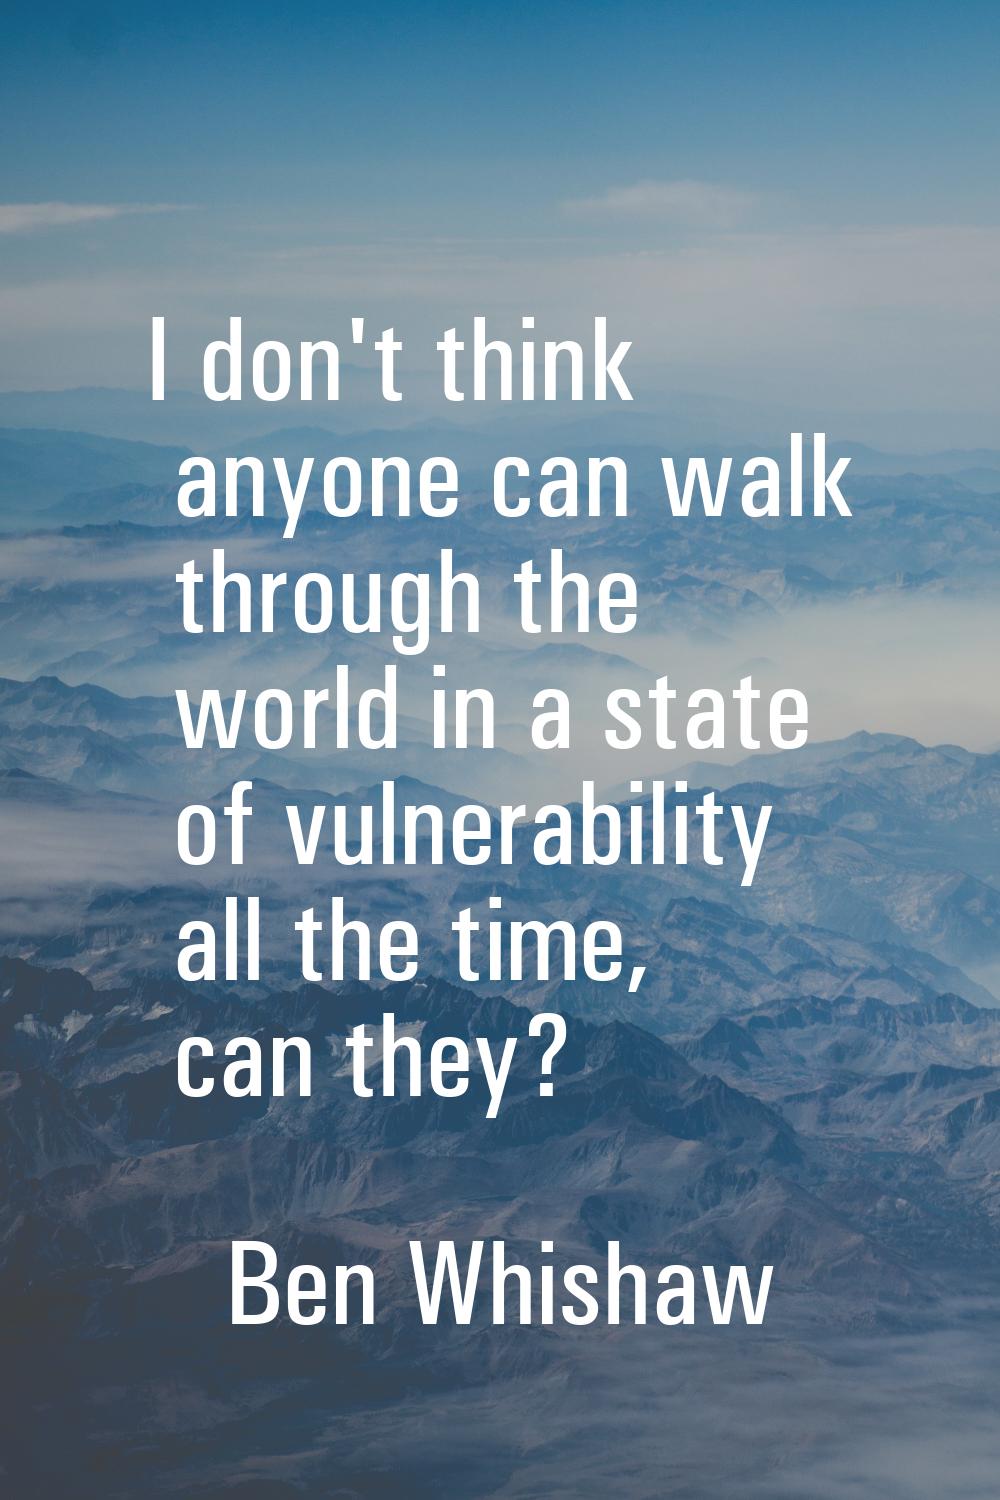 I don't think anyone can walk through the world in a state of vulnerability all the time, can they?